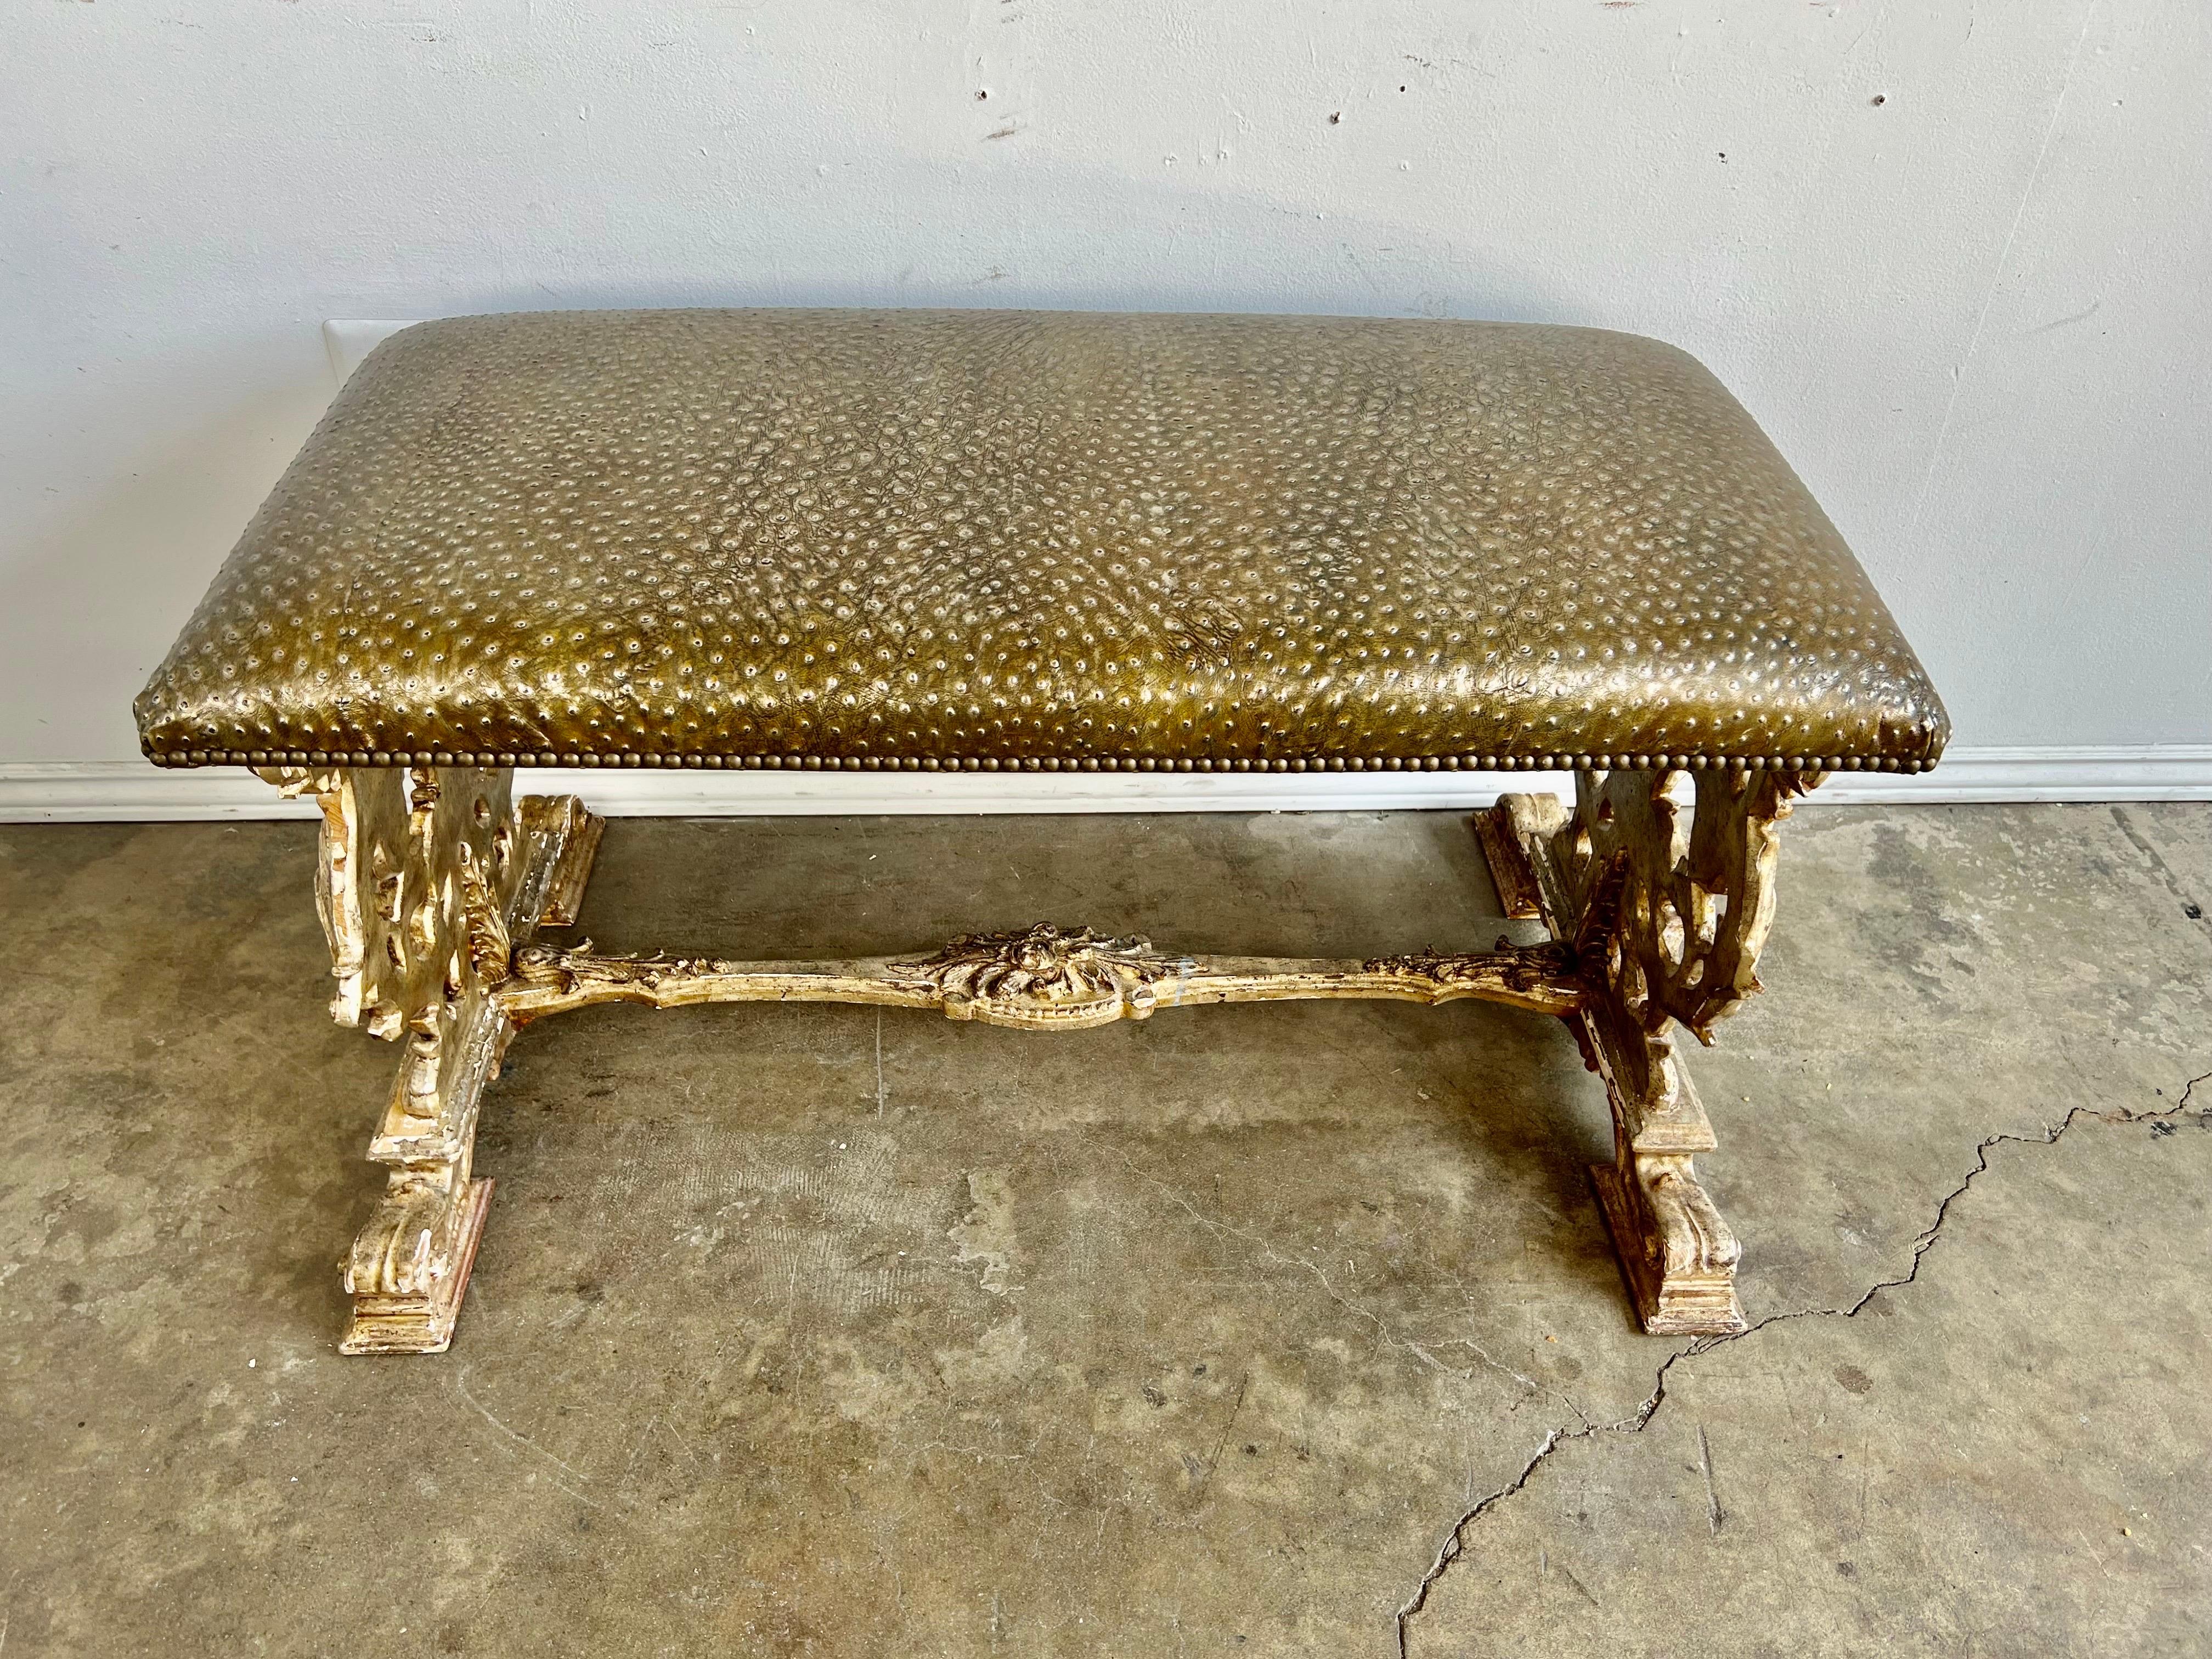 19th C. giltwood Italian Rococo style bench. The bench is beautifully hand carved with details of scrolled acanthus leaves and flowers throughout. The bench is newly upholstered in a bronze colored embossed leather and finished with brass nailhead